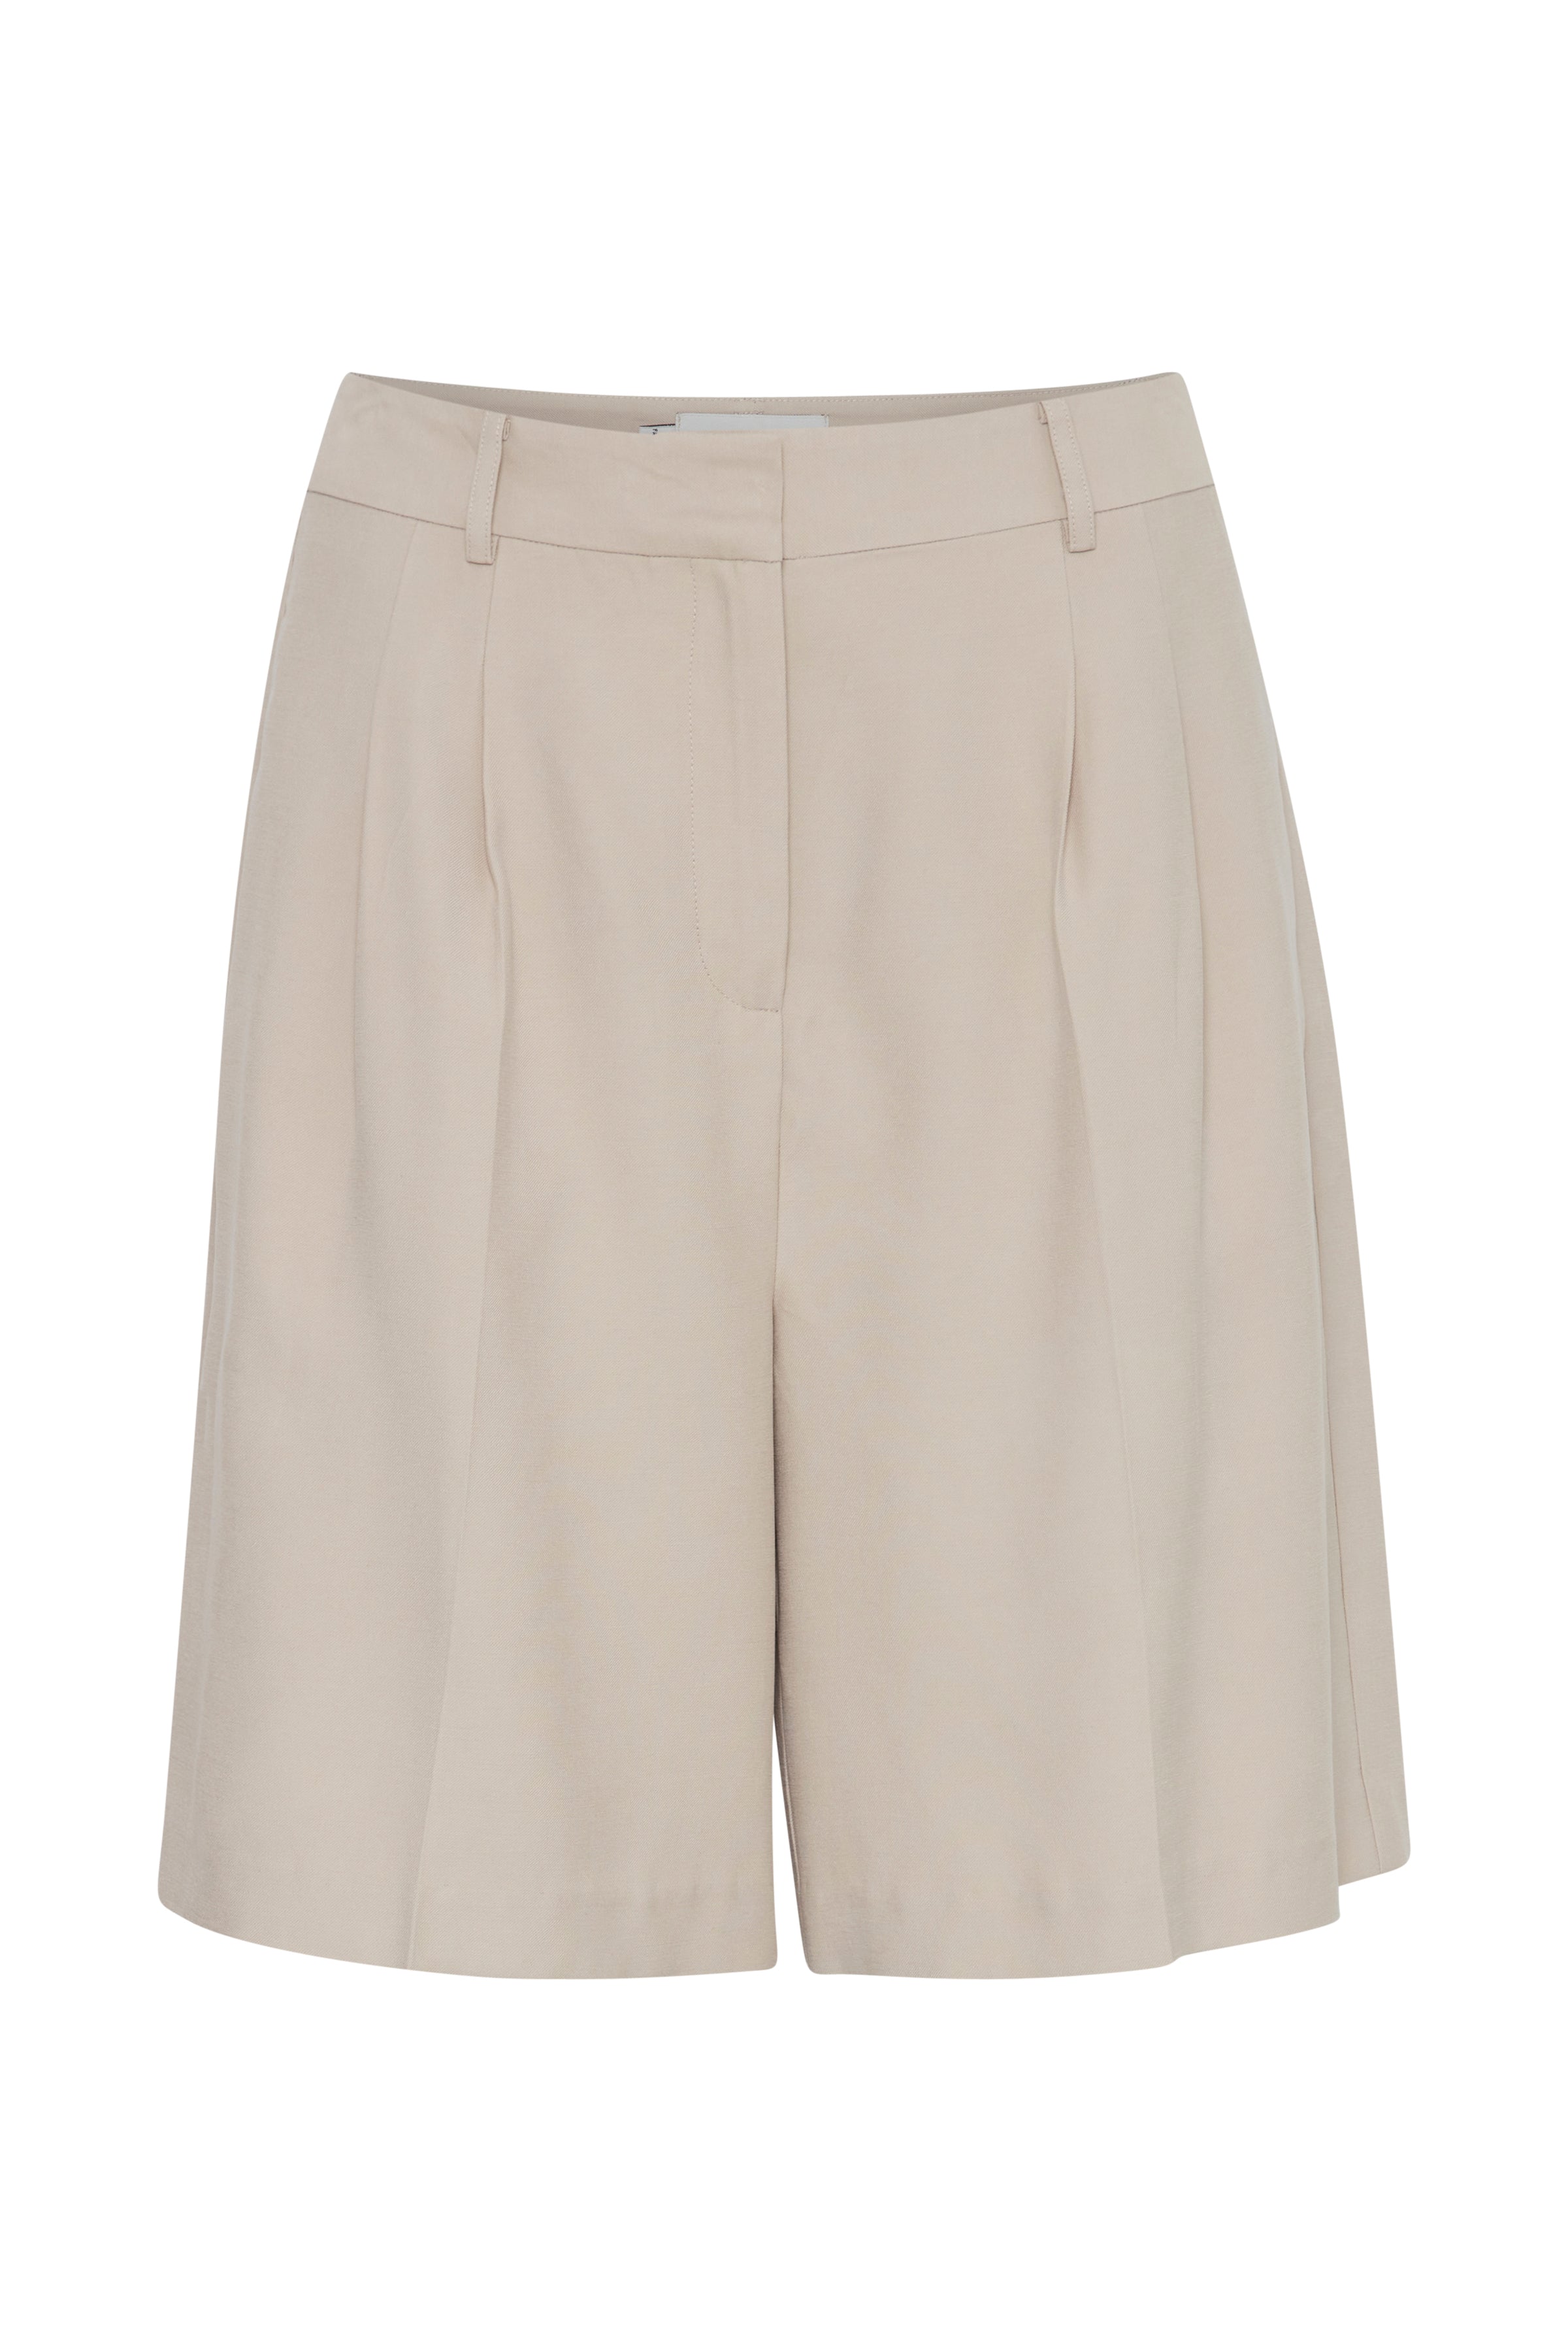 Rivaly Shorts in Oxford Tan